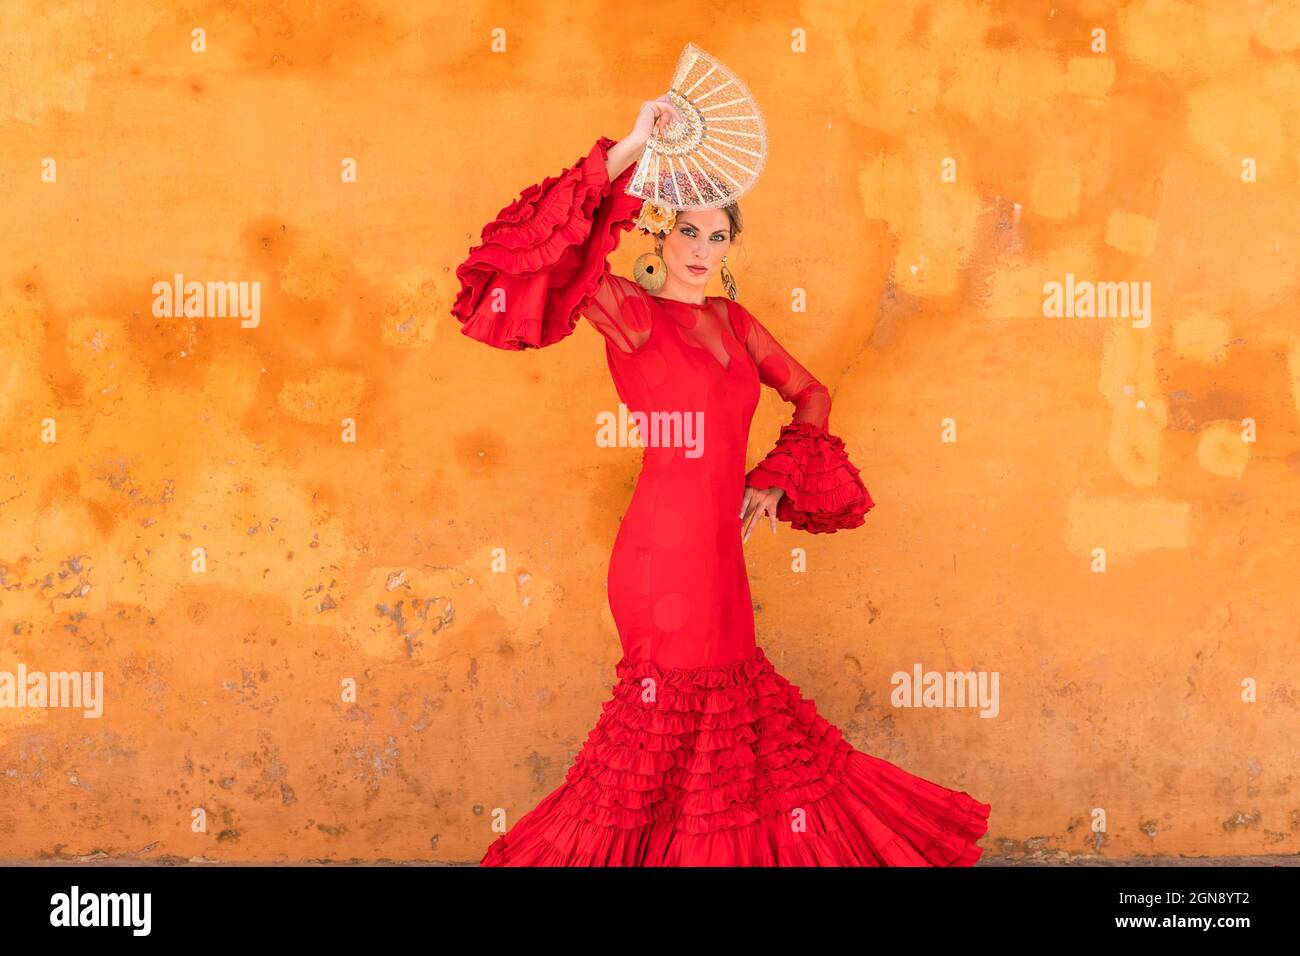 Female flamenco dancer with hand fan standing in front of wall Stock Photo